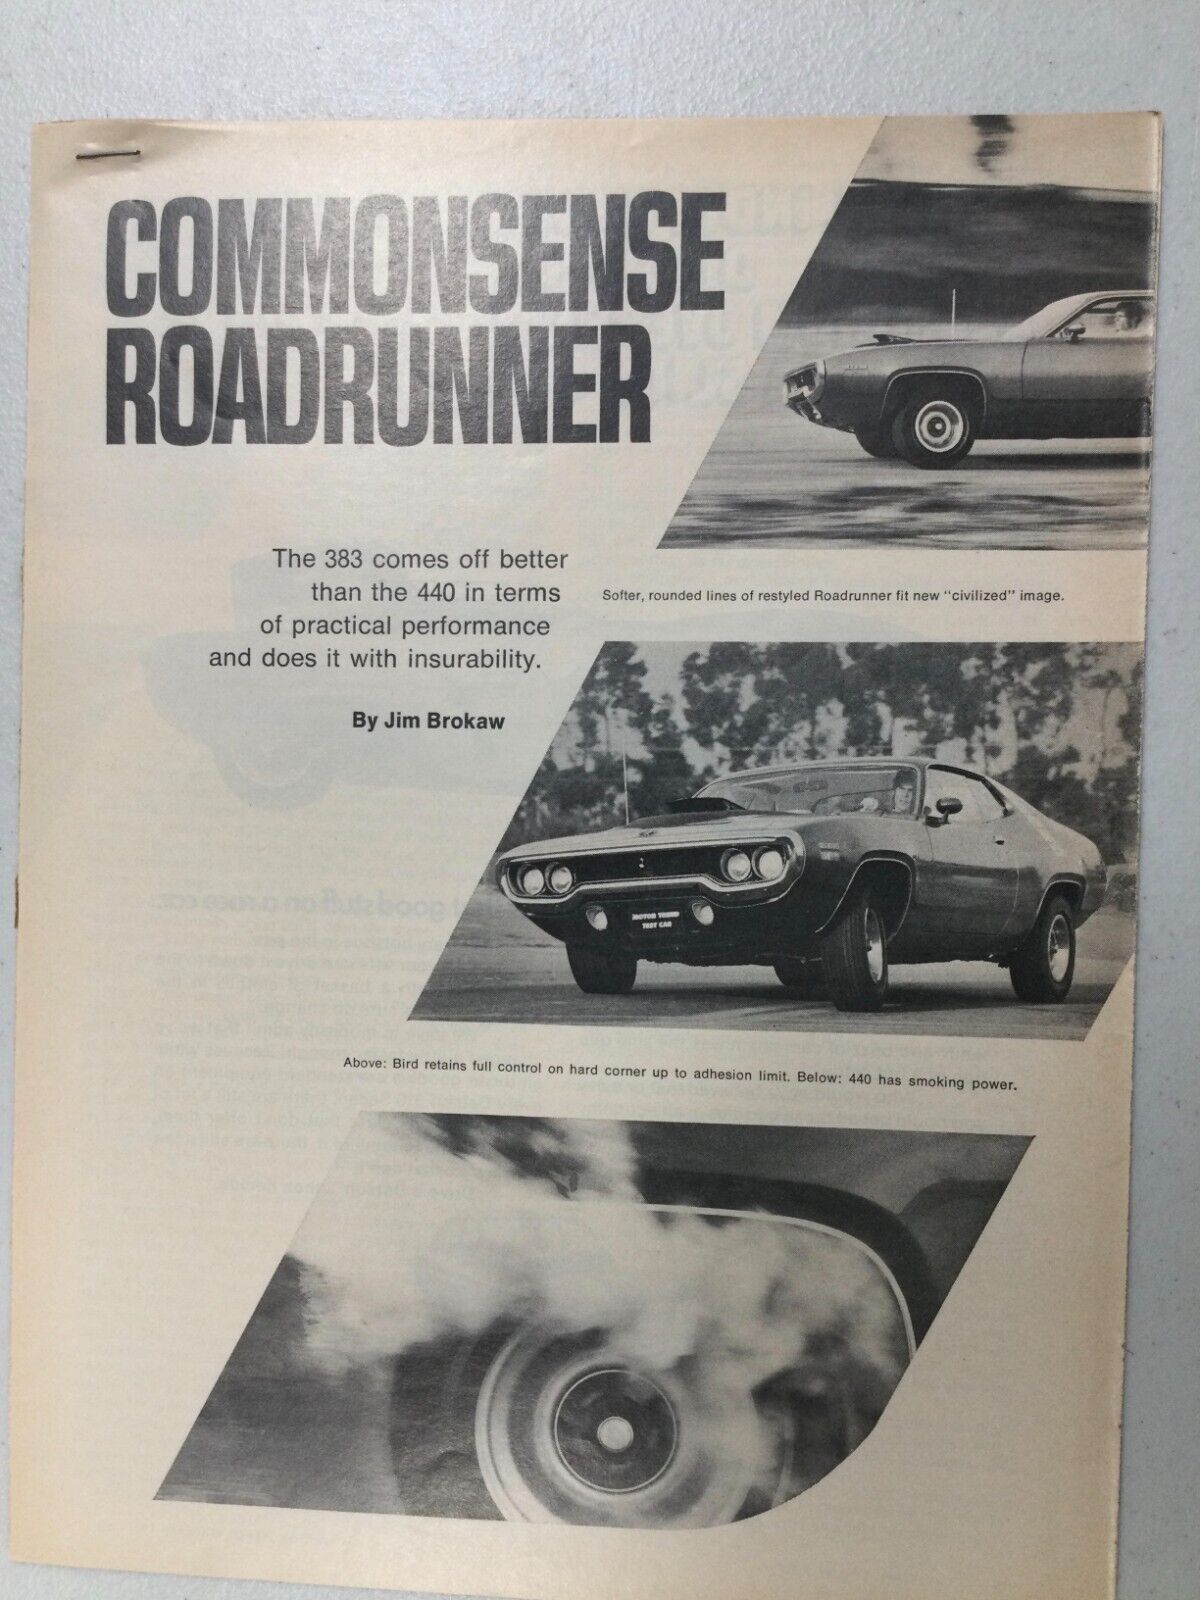 Plymouth12 Article Commonsense ROADRUNNER 383 vs 440 Feb 1971 5 page